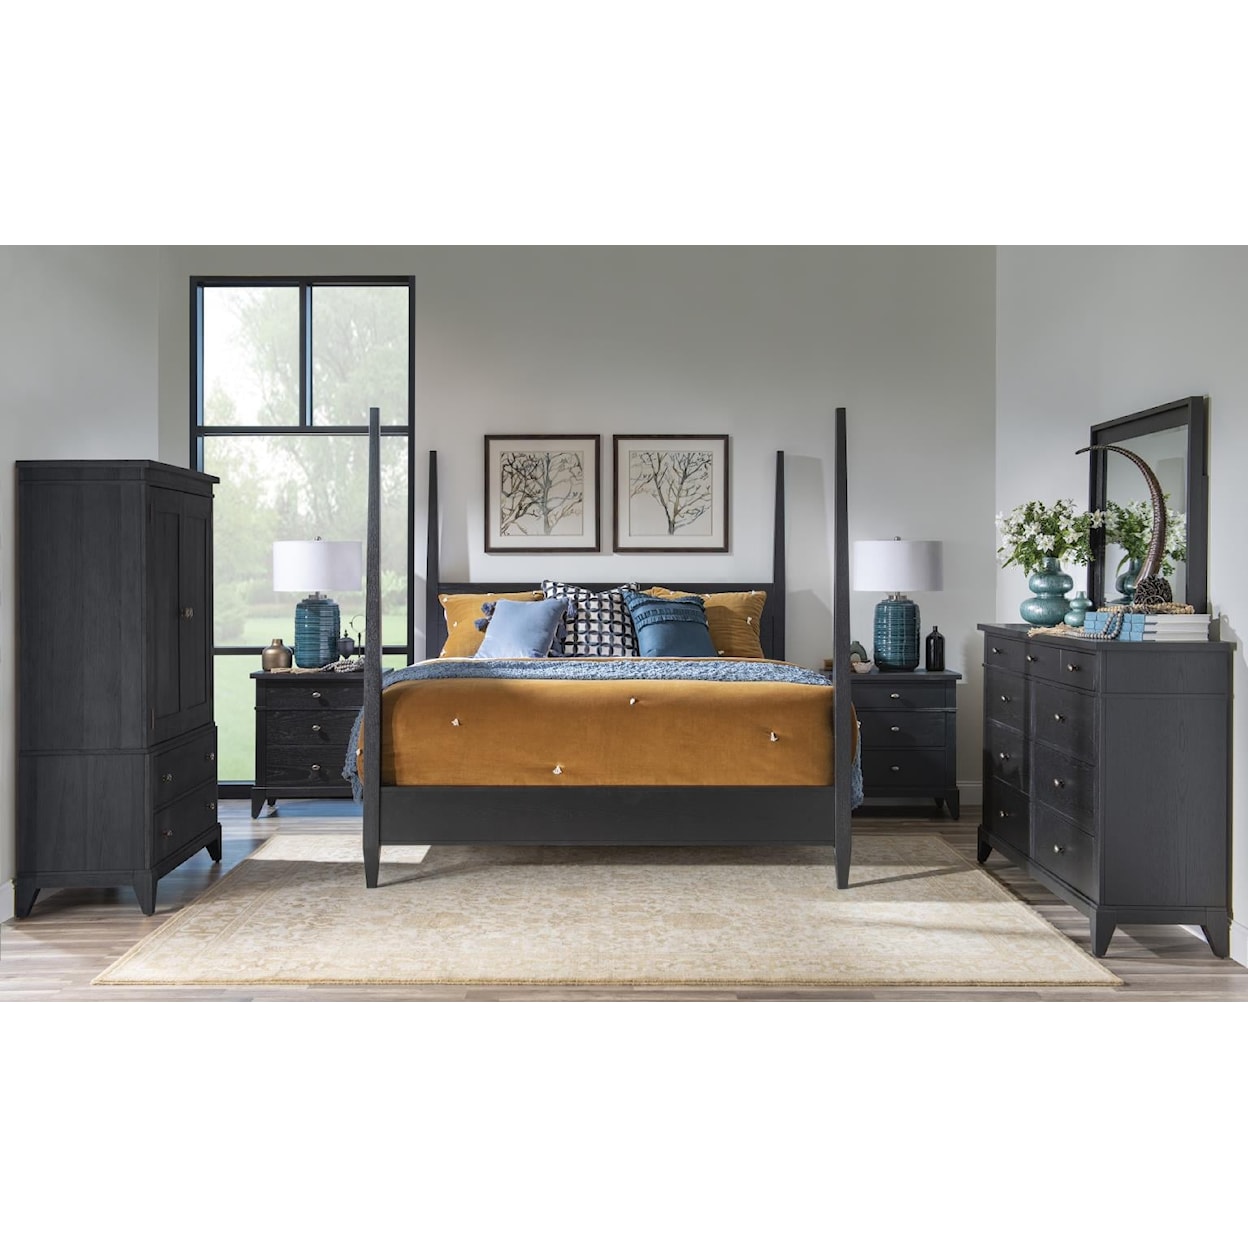 Trisha Yearwood Home Collection by Legacy Classic Today's Traditions 6-Piece Bedroom Set